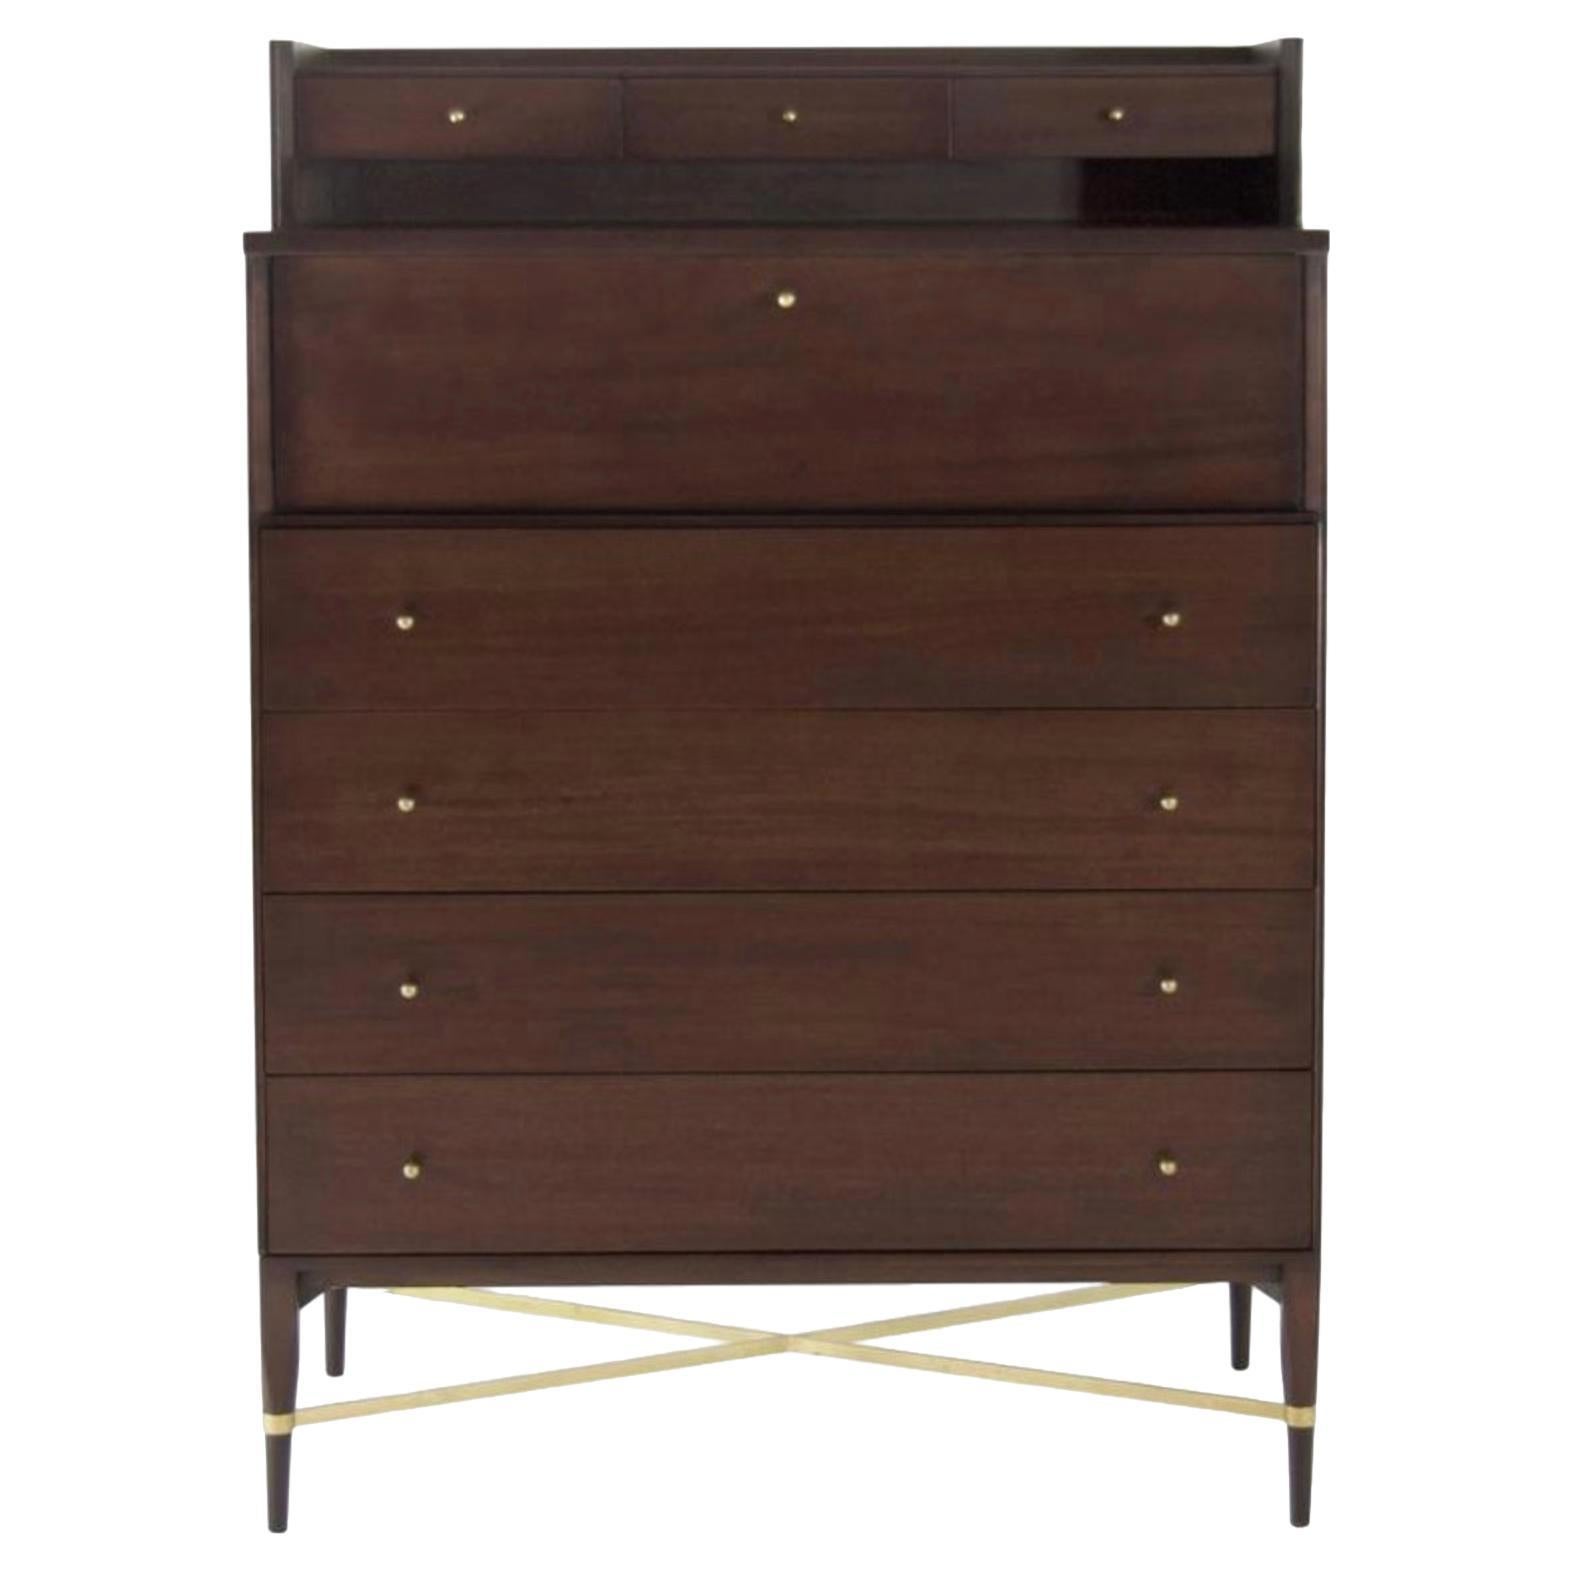 Paul McCobb Mid-Century Modern Tall Gentleman's Chest of Drawers - Calvin Group For Sale